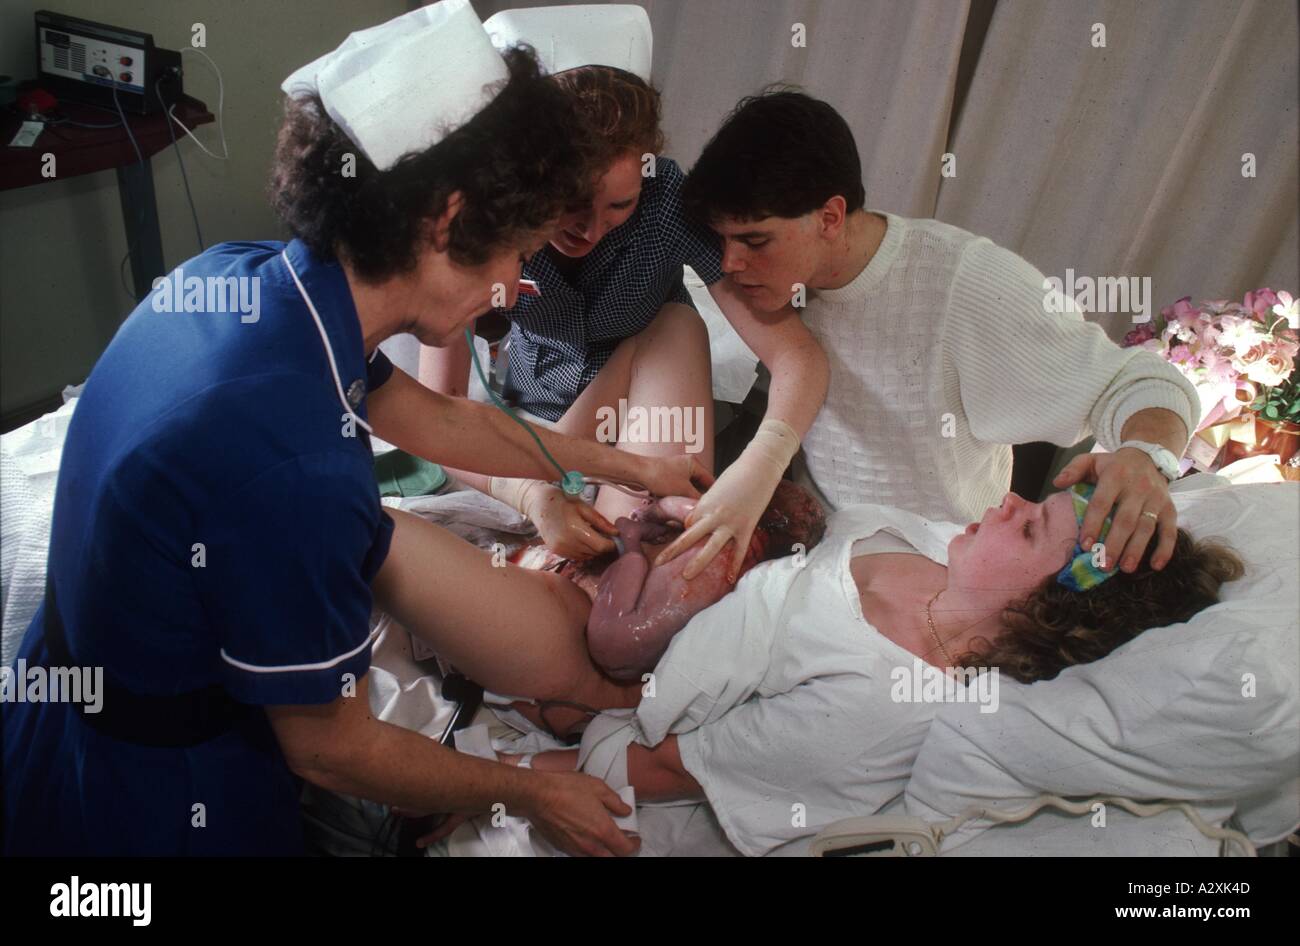 Images Of Woman Giving Birth 80